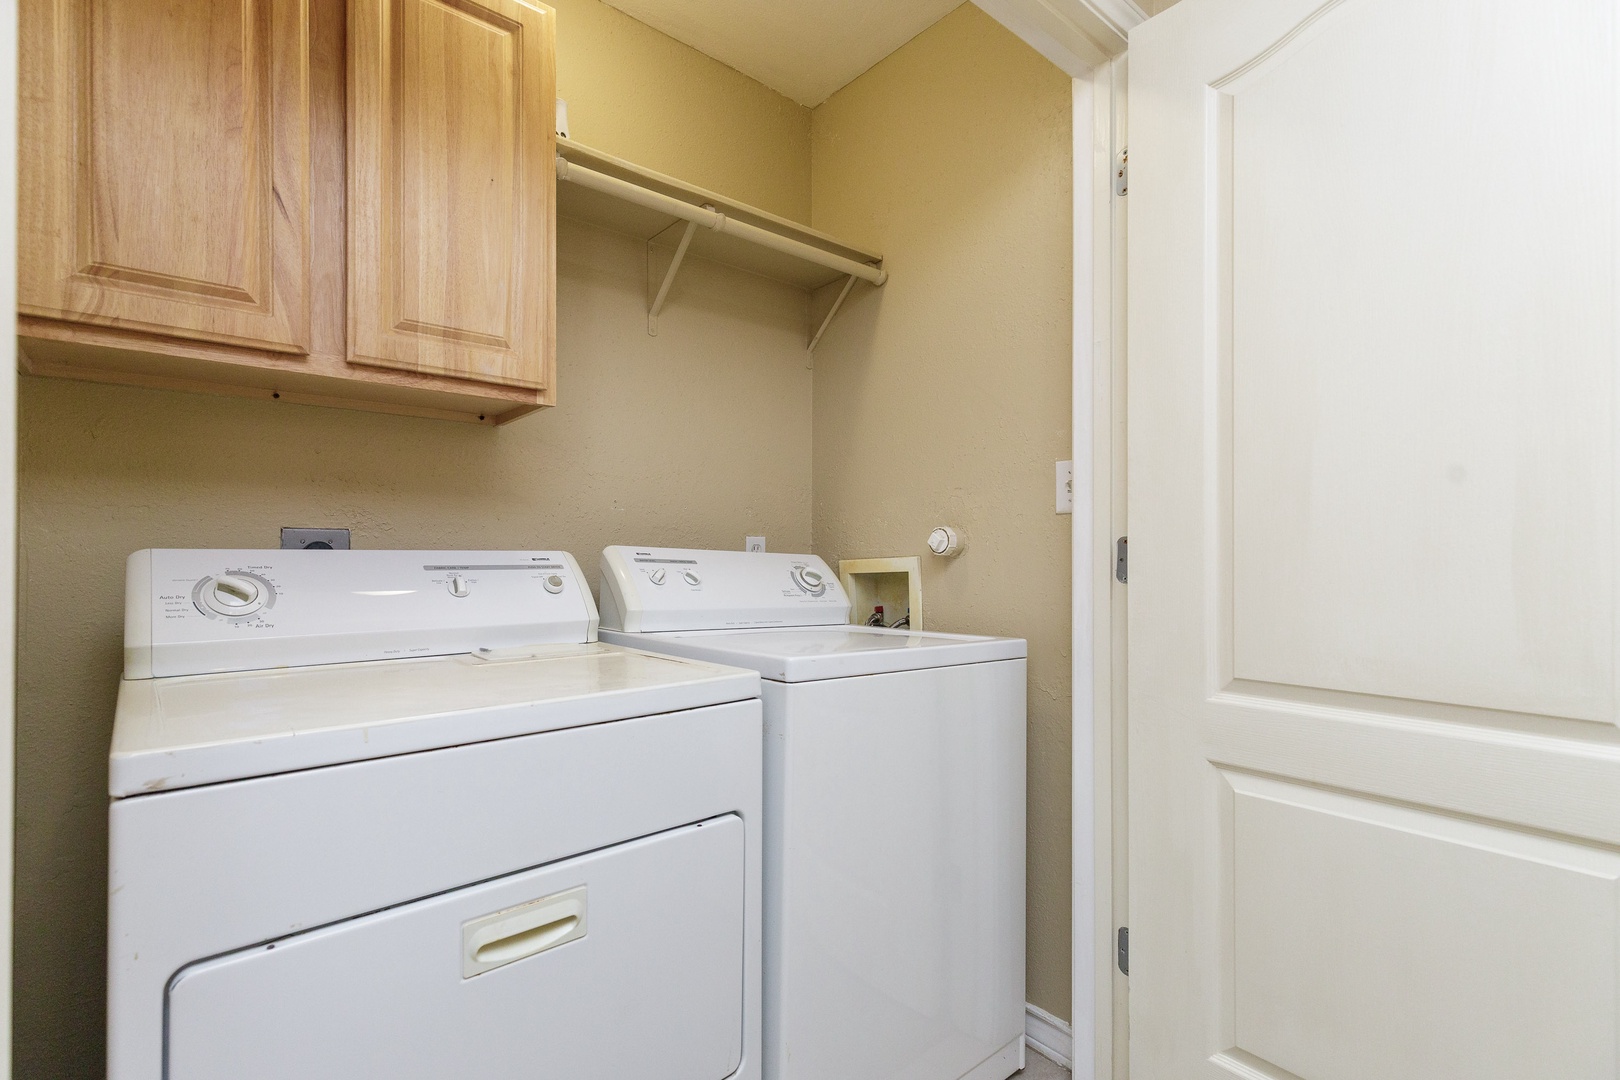 Private laundry is available for your stay, located on the 3rd floor